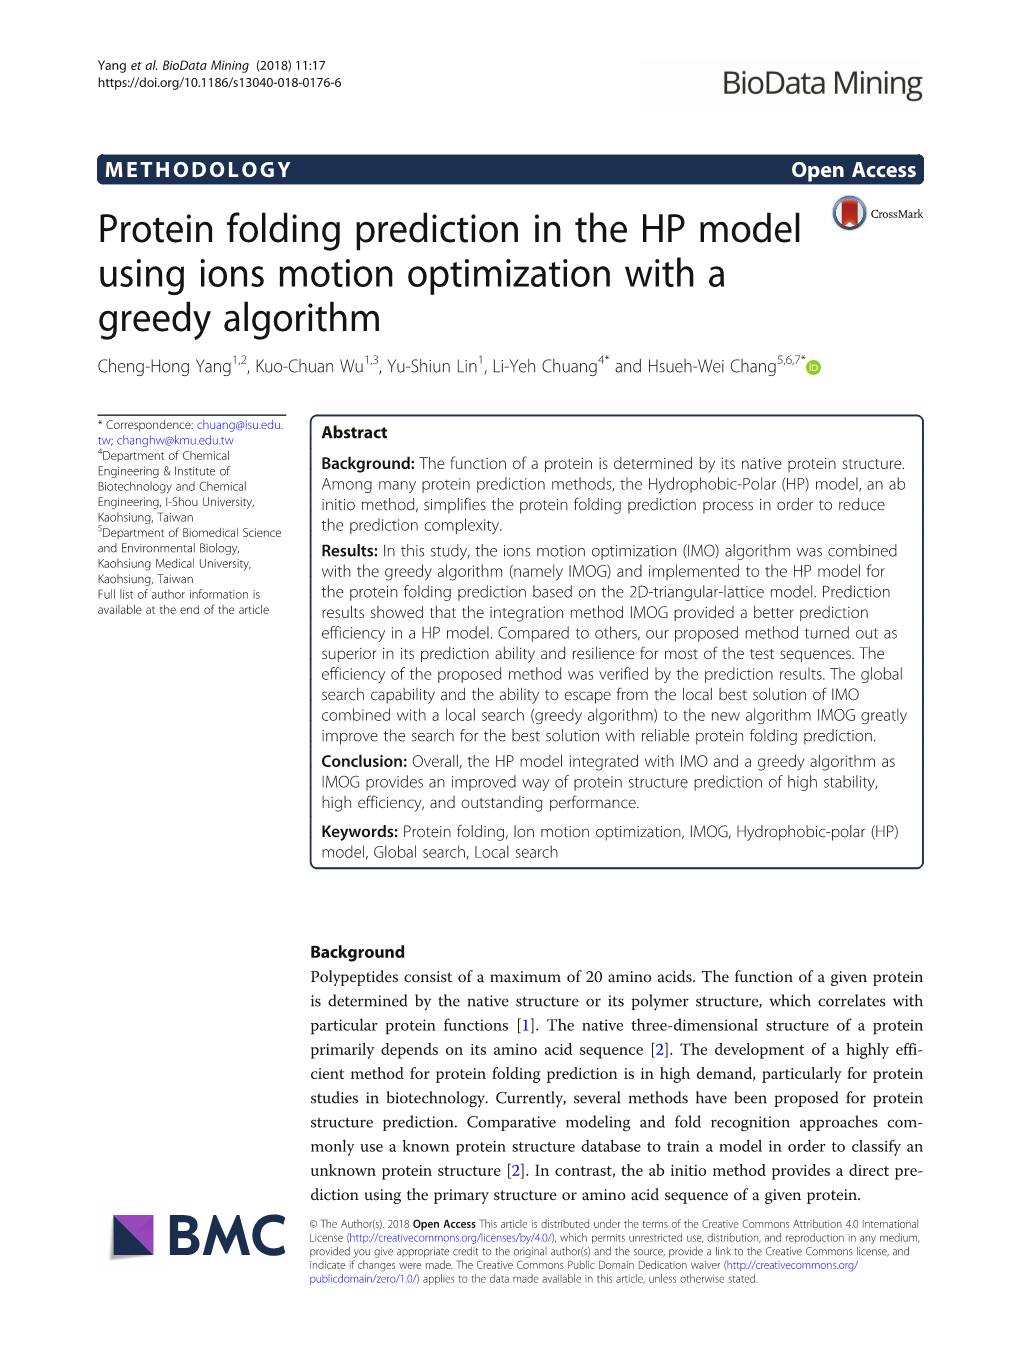 Protein Folding Prediction in the HP Model Using Ions Motion